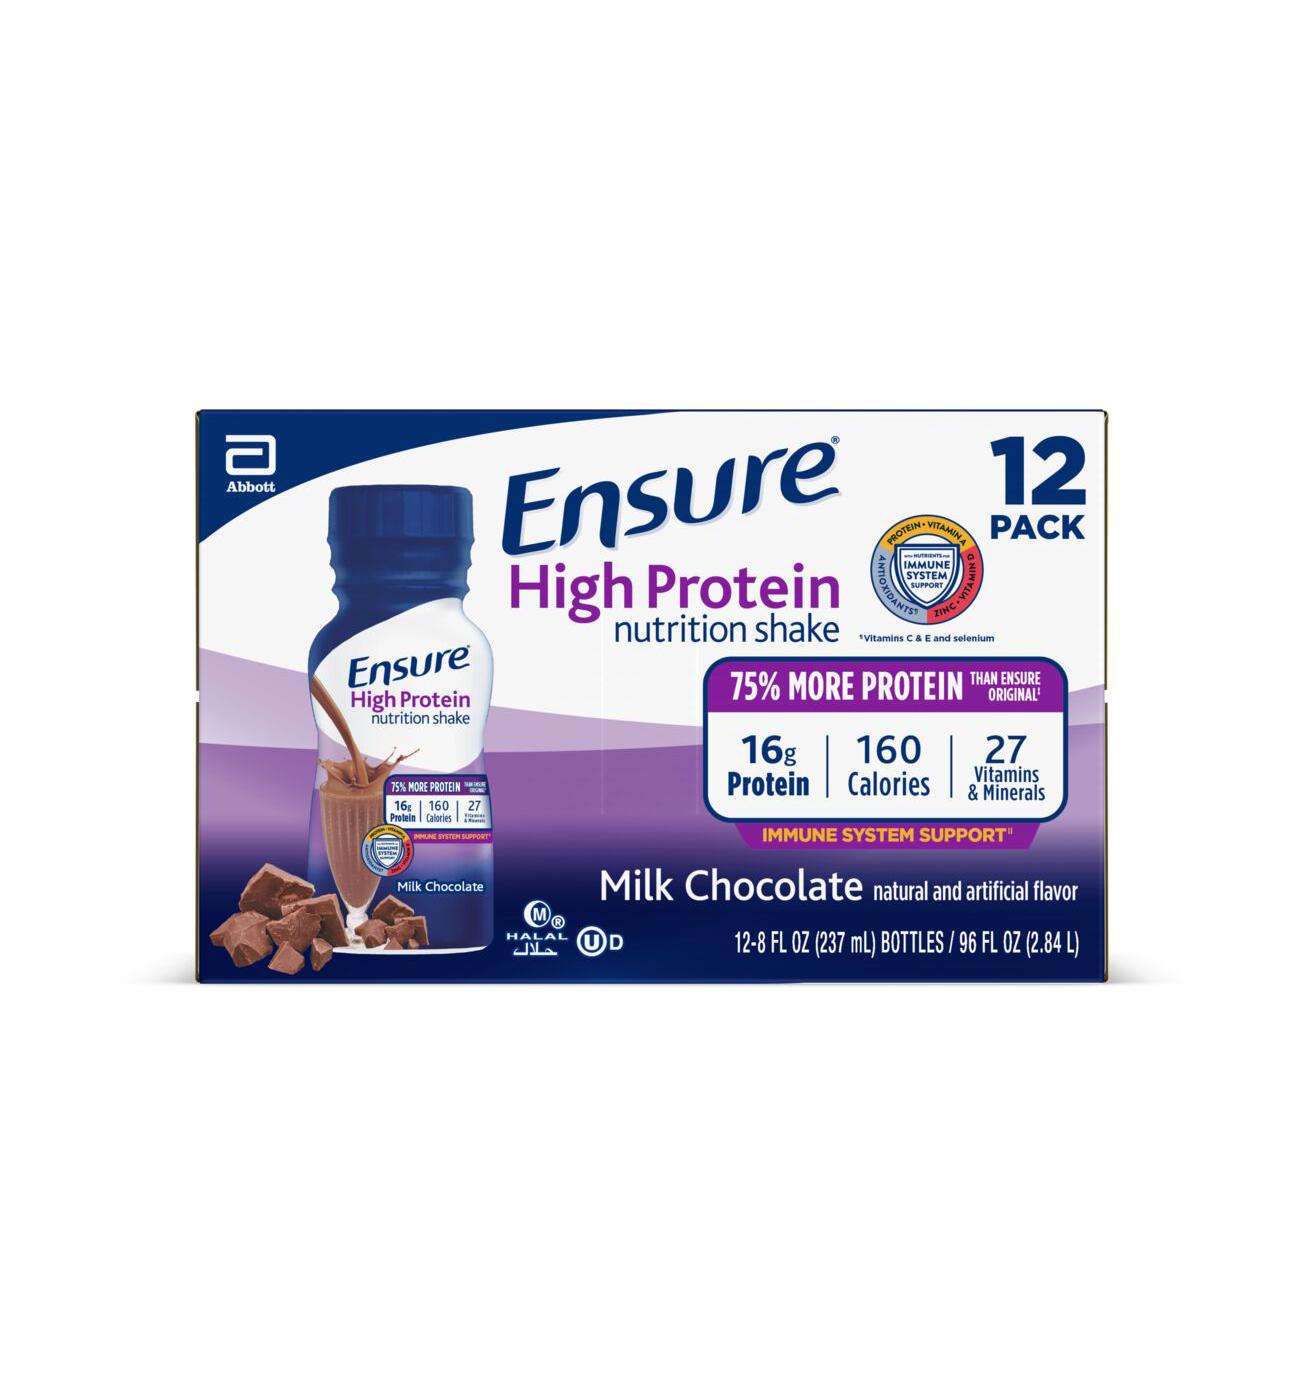 Ensure Ensure High Protein Nutritional Shake, 16g Protein, Meal Replacement Shake, Milk Chocolate, 8 fl oz, 12 Ct; image 1 of 2